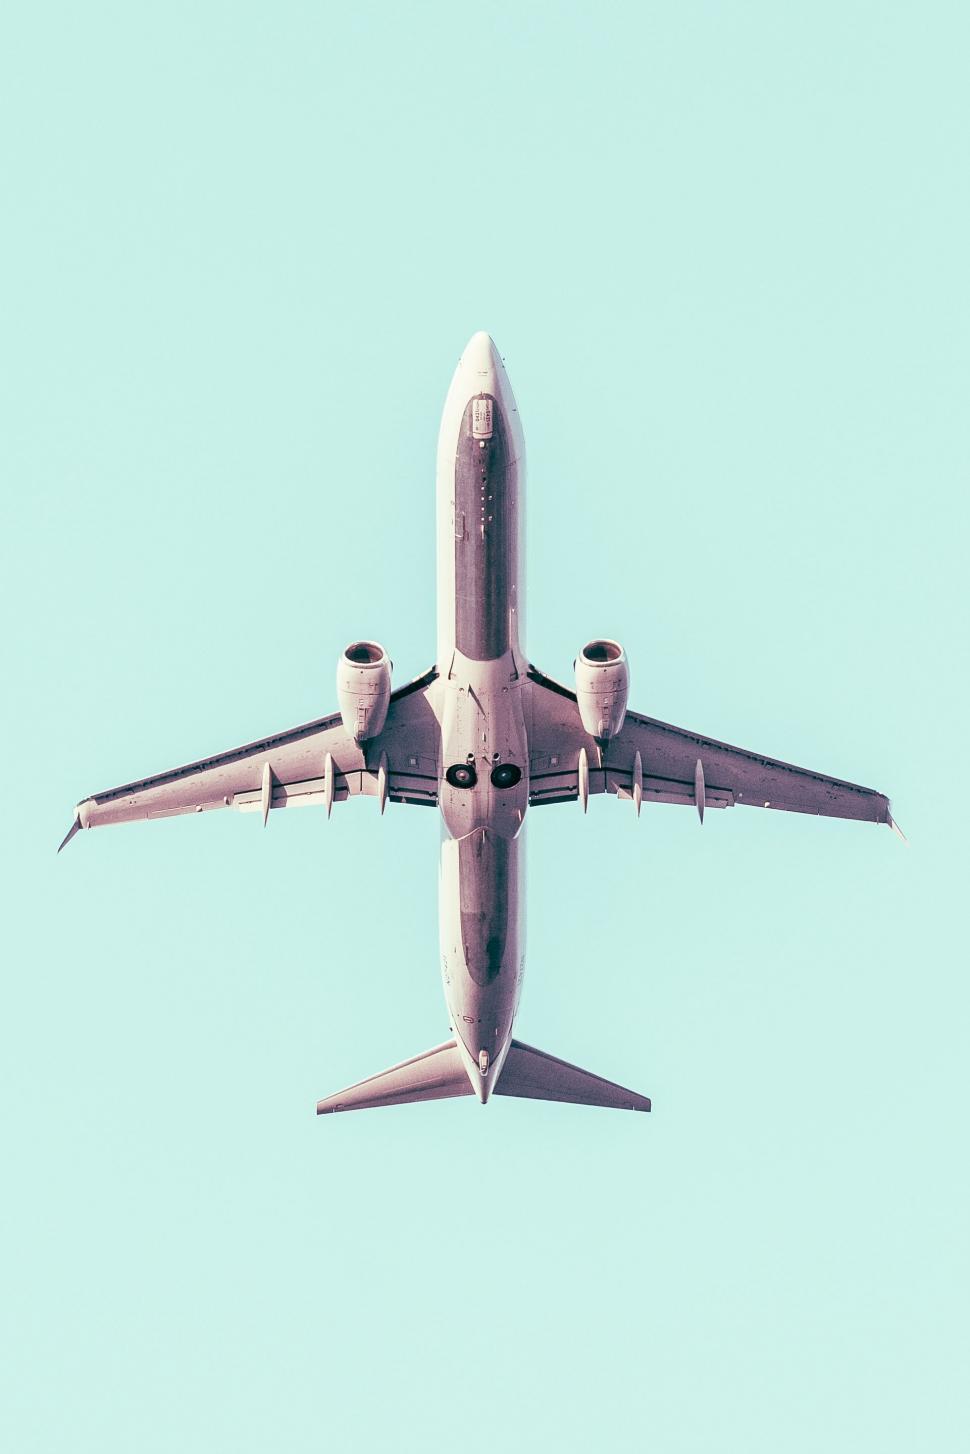 Free Image of Airplane From Below 